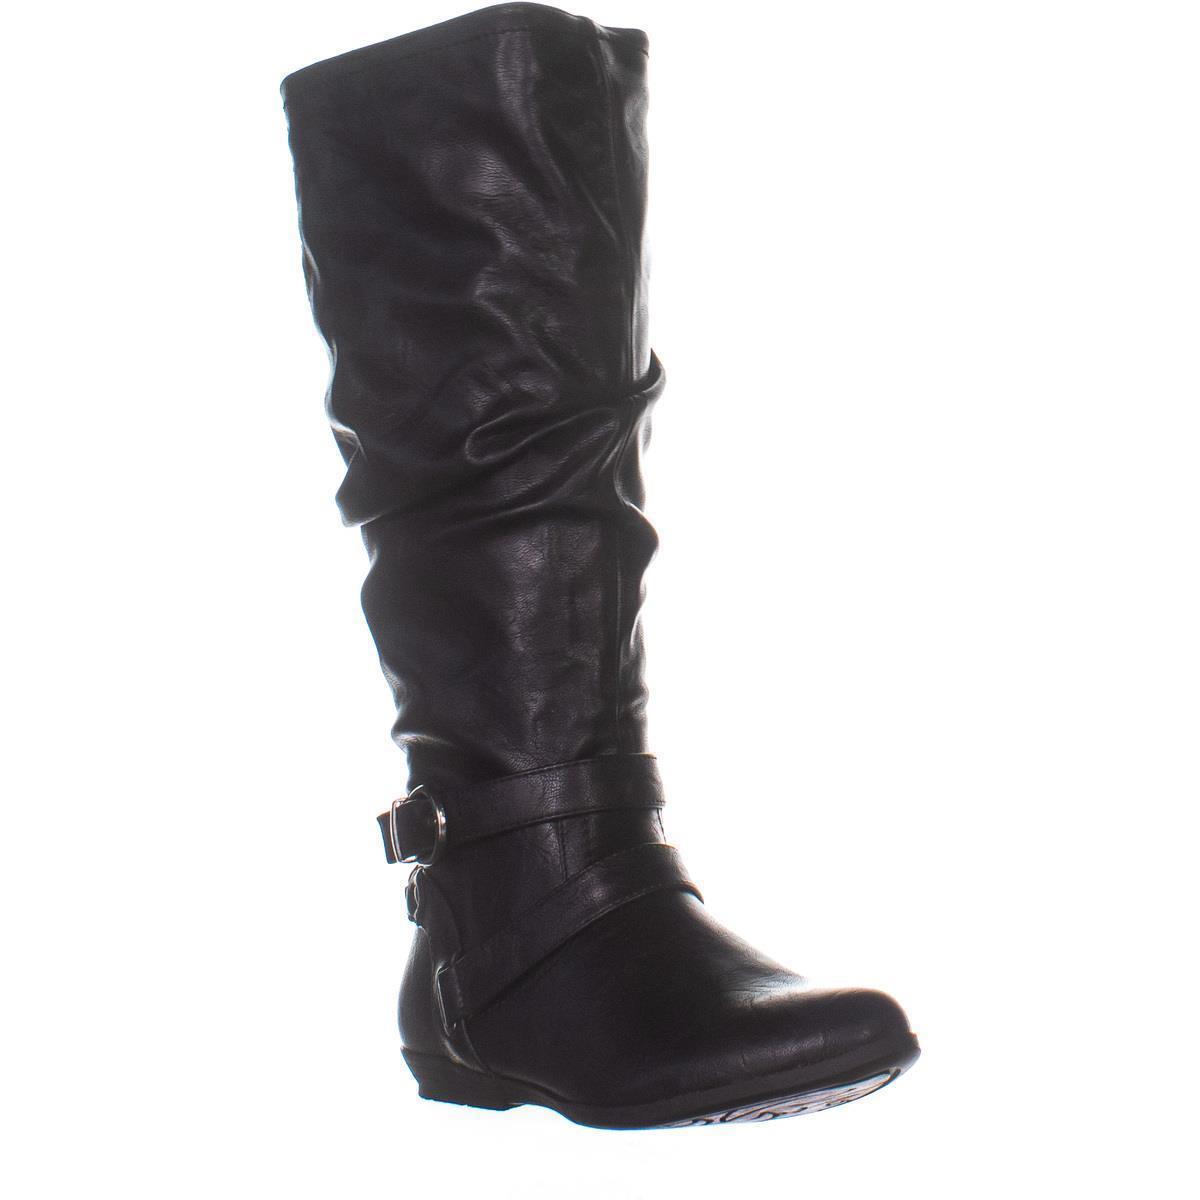 Cliffs By White Mountain Fairfield Wide Calf Boots, Black - Boots